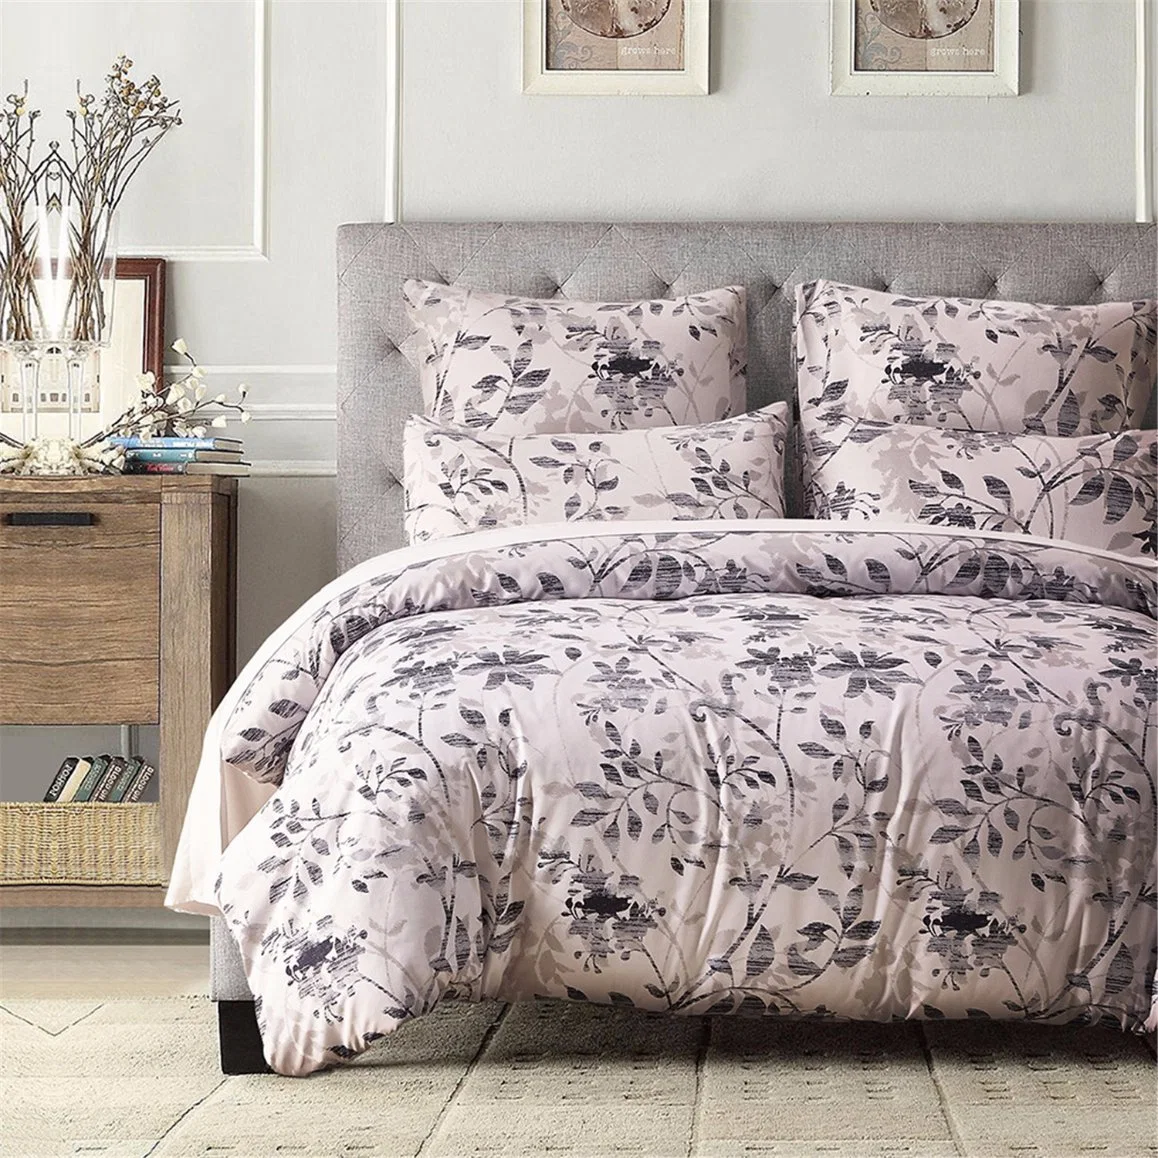 China Wholesale Home Bedding Comforter Cover Set